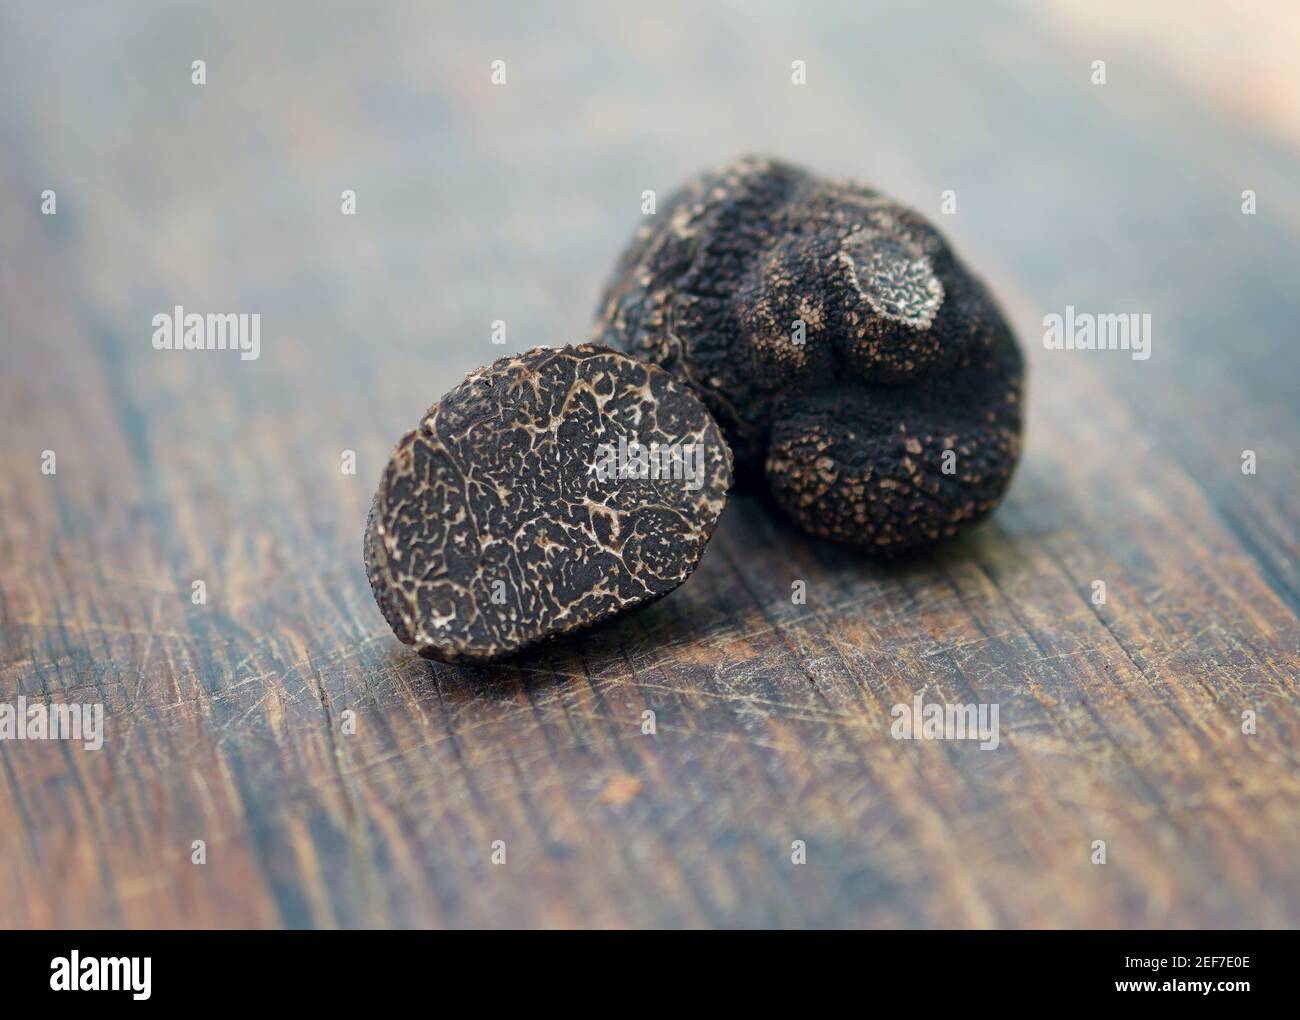 Truffles on a wooden background Stock Photo